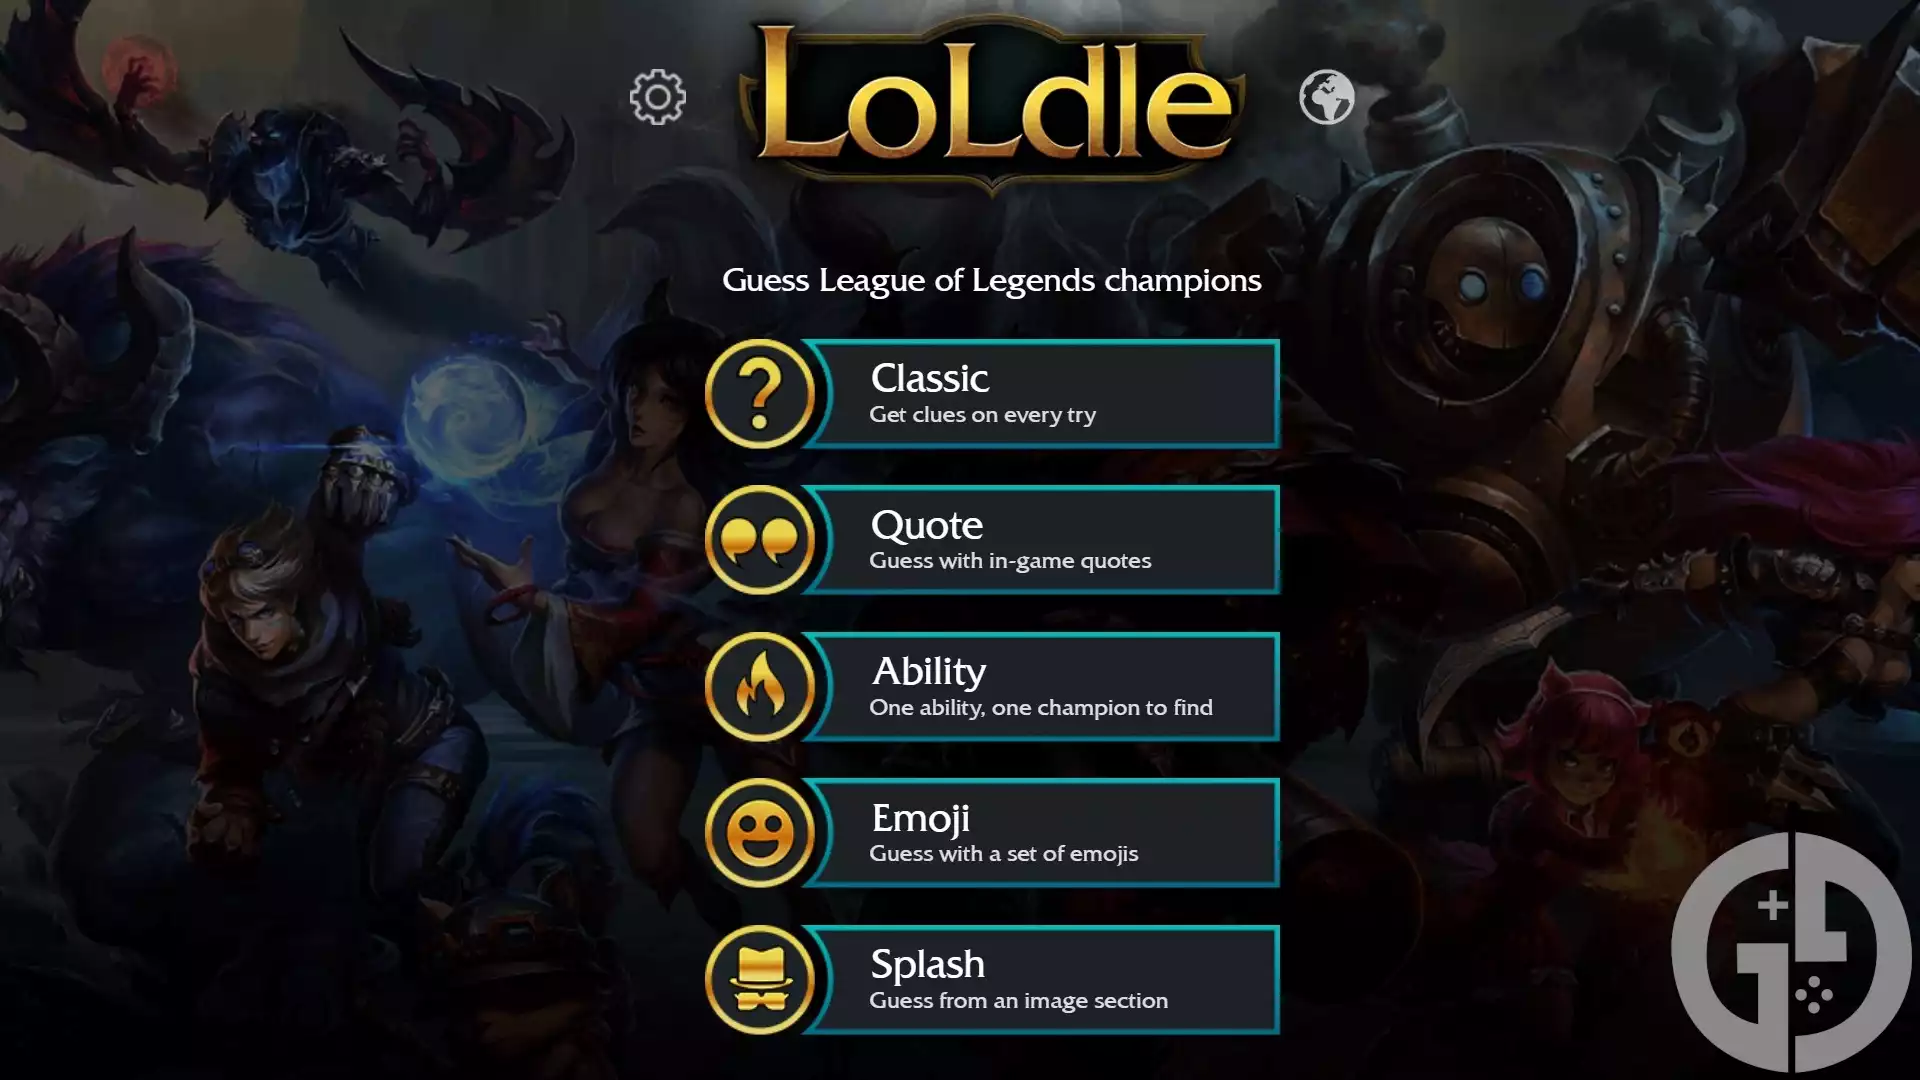 'LoLdle' answers for today, including Classic, Quote & more (May 8th)